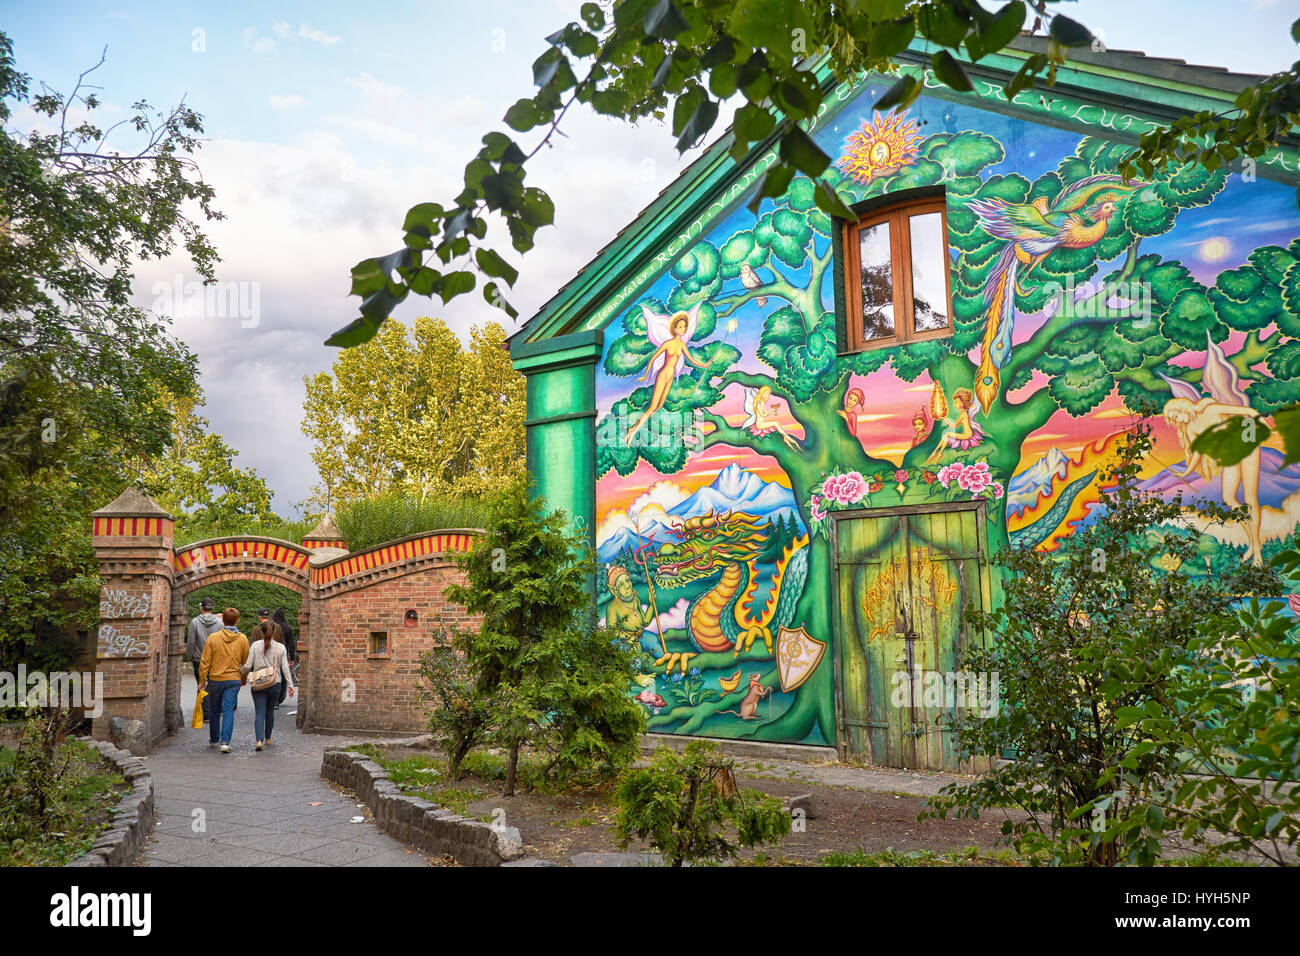 COPENHAGEN, DENMARK - AUGUST 22, 2014: The house painted by author graffiti at the entrance to Christiania in Copengagen, Denmark. Fristaden Christian Stock Photo